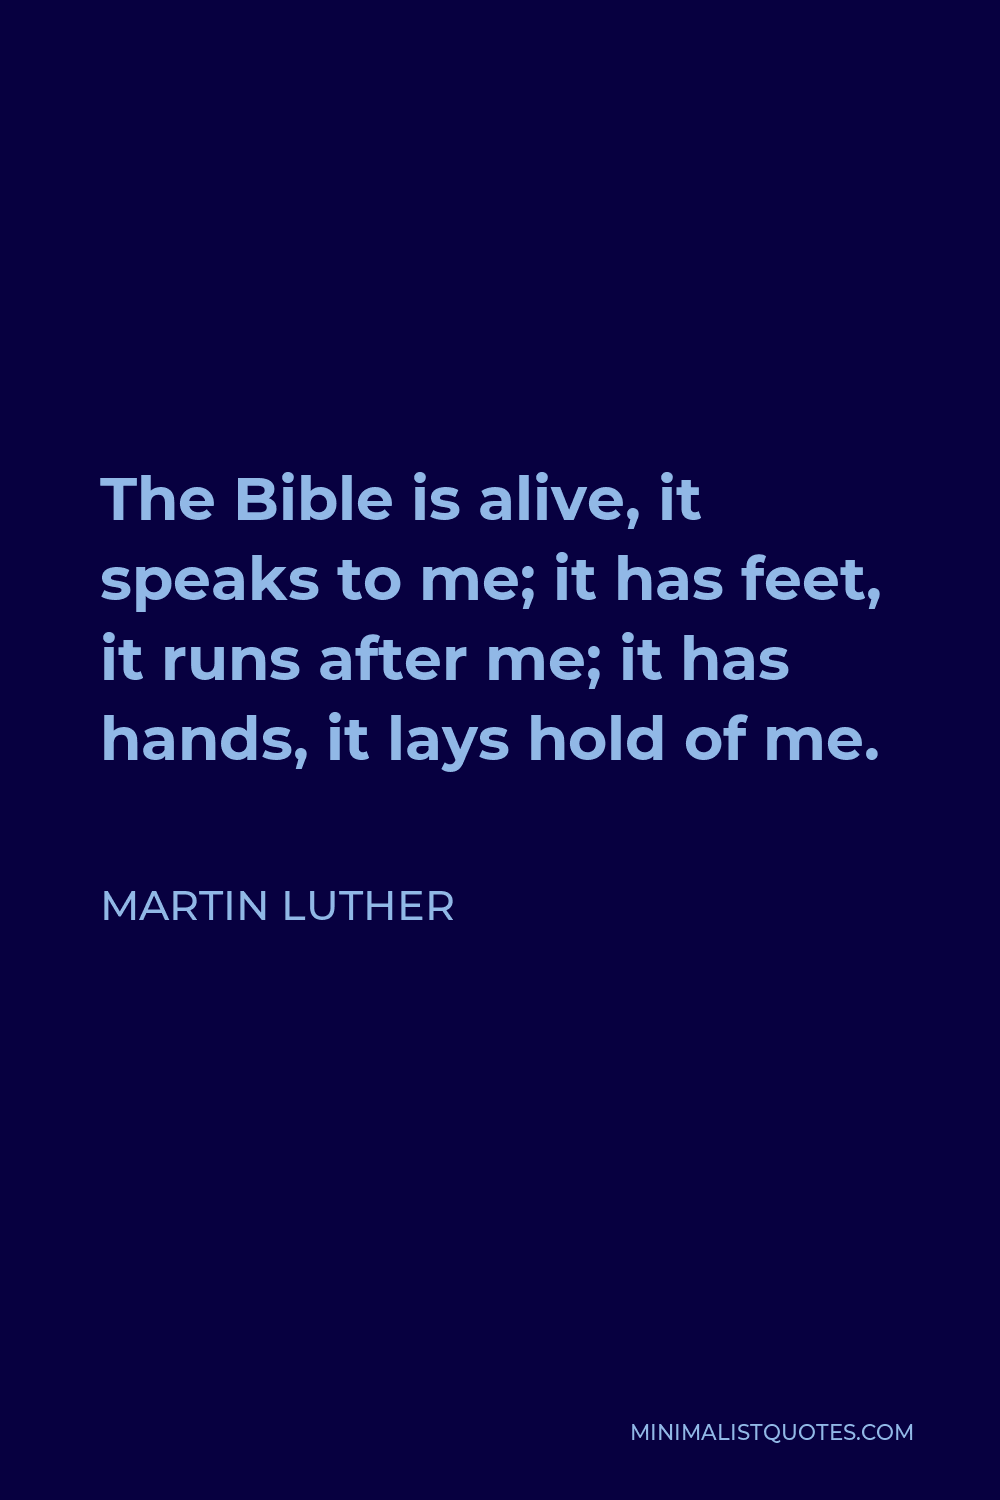 Martin Luther Quote - The Bible is alive, it speaks to me; it has feet, it runs after me; it has hands, it lays hold of me.